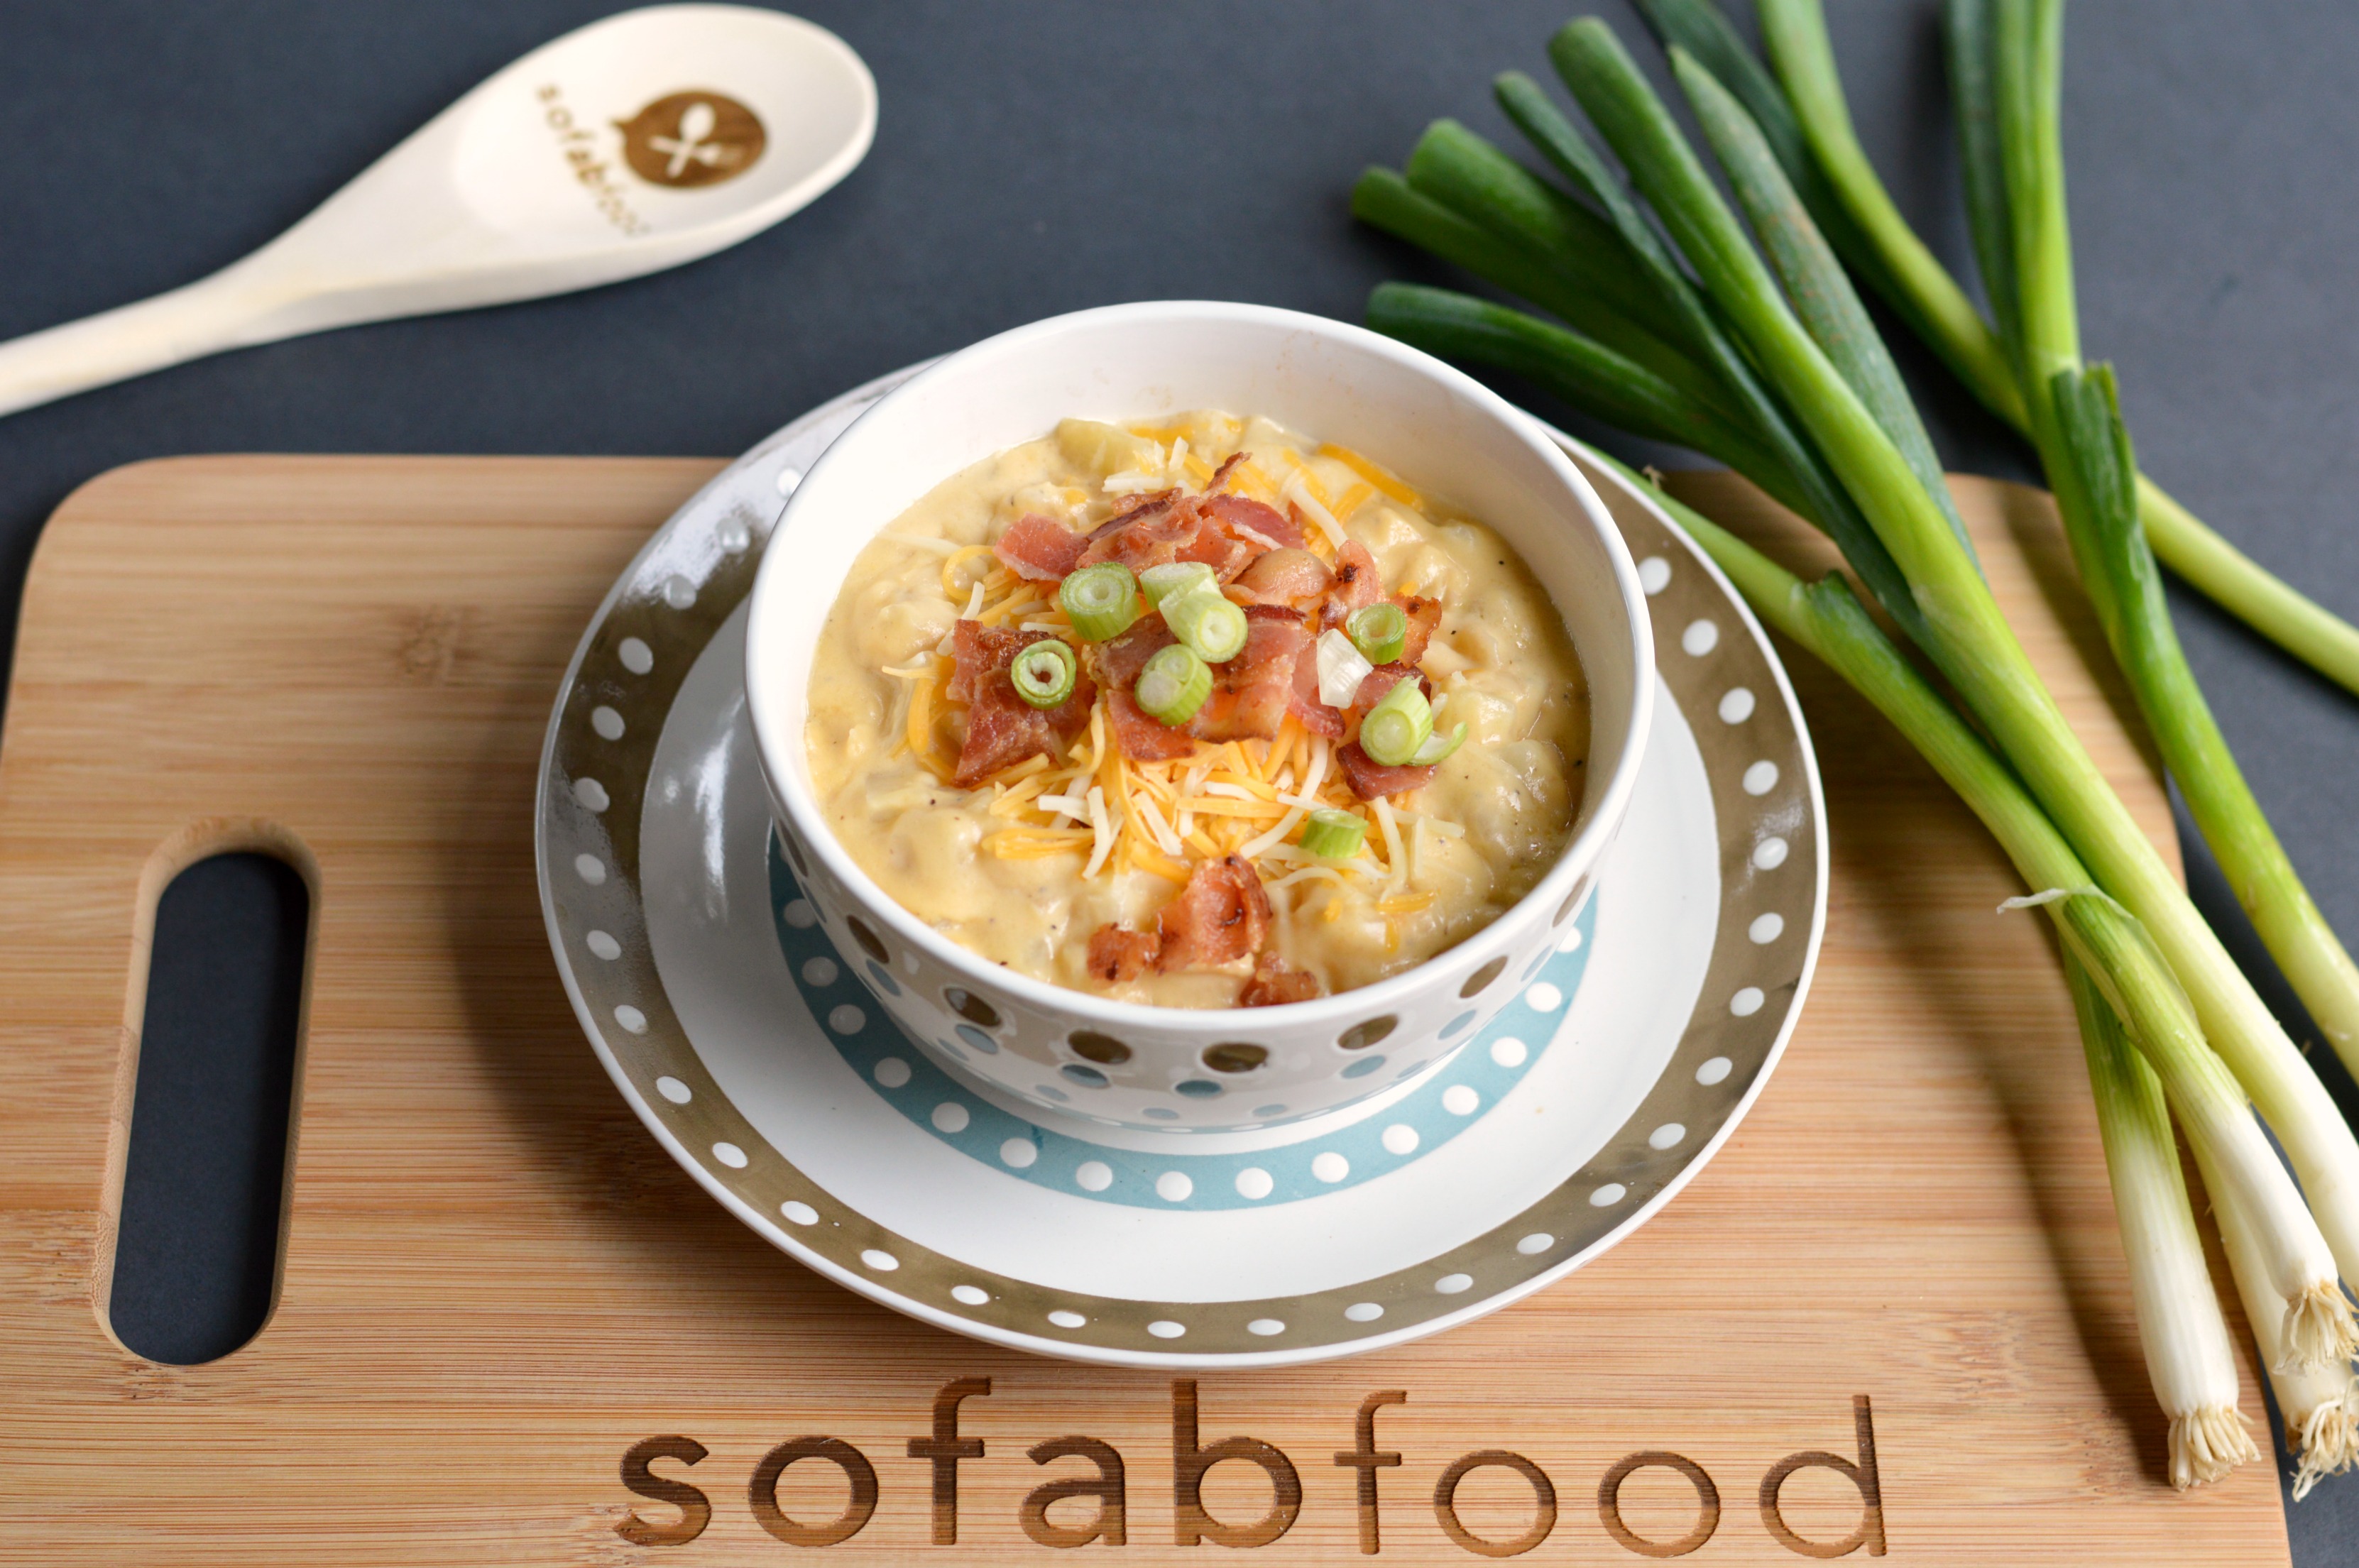 Loaded Baked Potato Soup is the perfect homemade comfort food on a chilly evening. This stove-top or slow cooker soup is loaded with potatoes, bacon, and cheese. Perfect for a weeknight dinner or hearty lunch.